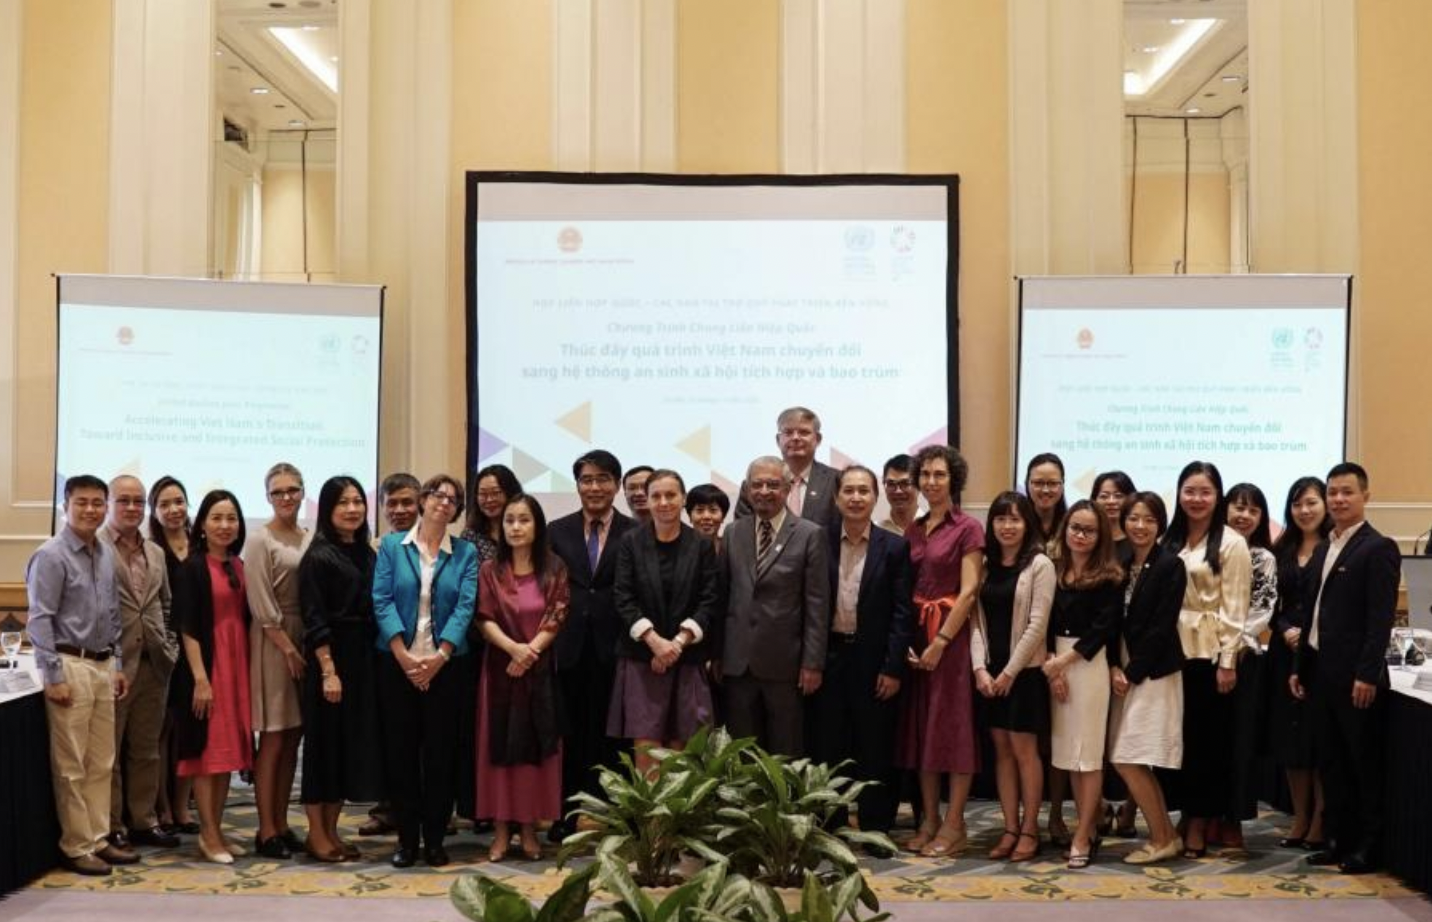 The Joint SDG Fund Joint Programme in Viet Nam organized a donor event in Hanoi on 27 November 2020 with donors and government partners participation Photo | UN in Viet Nam